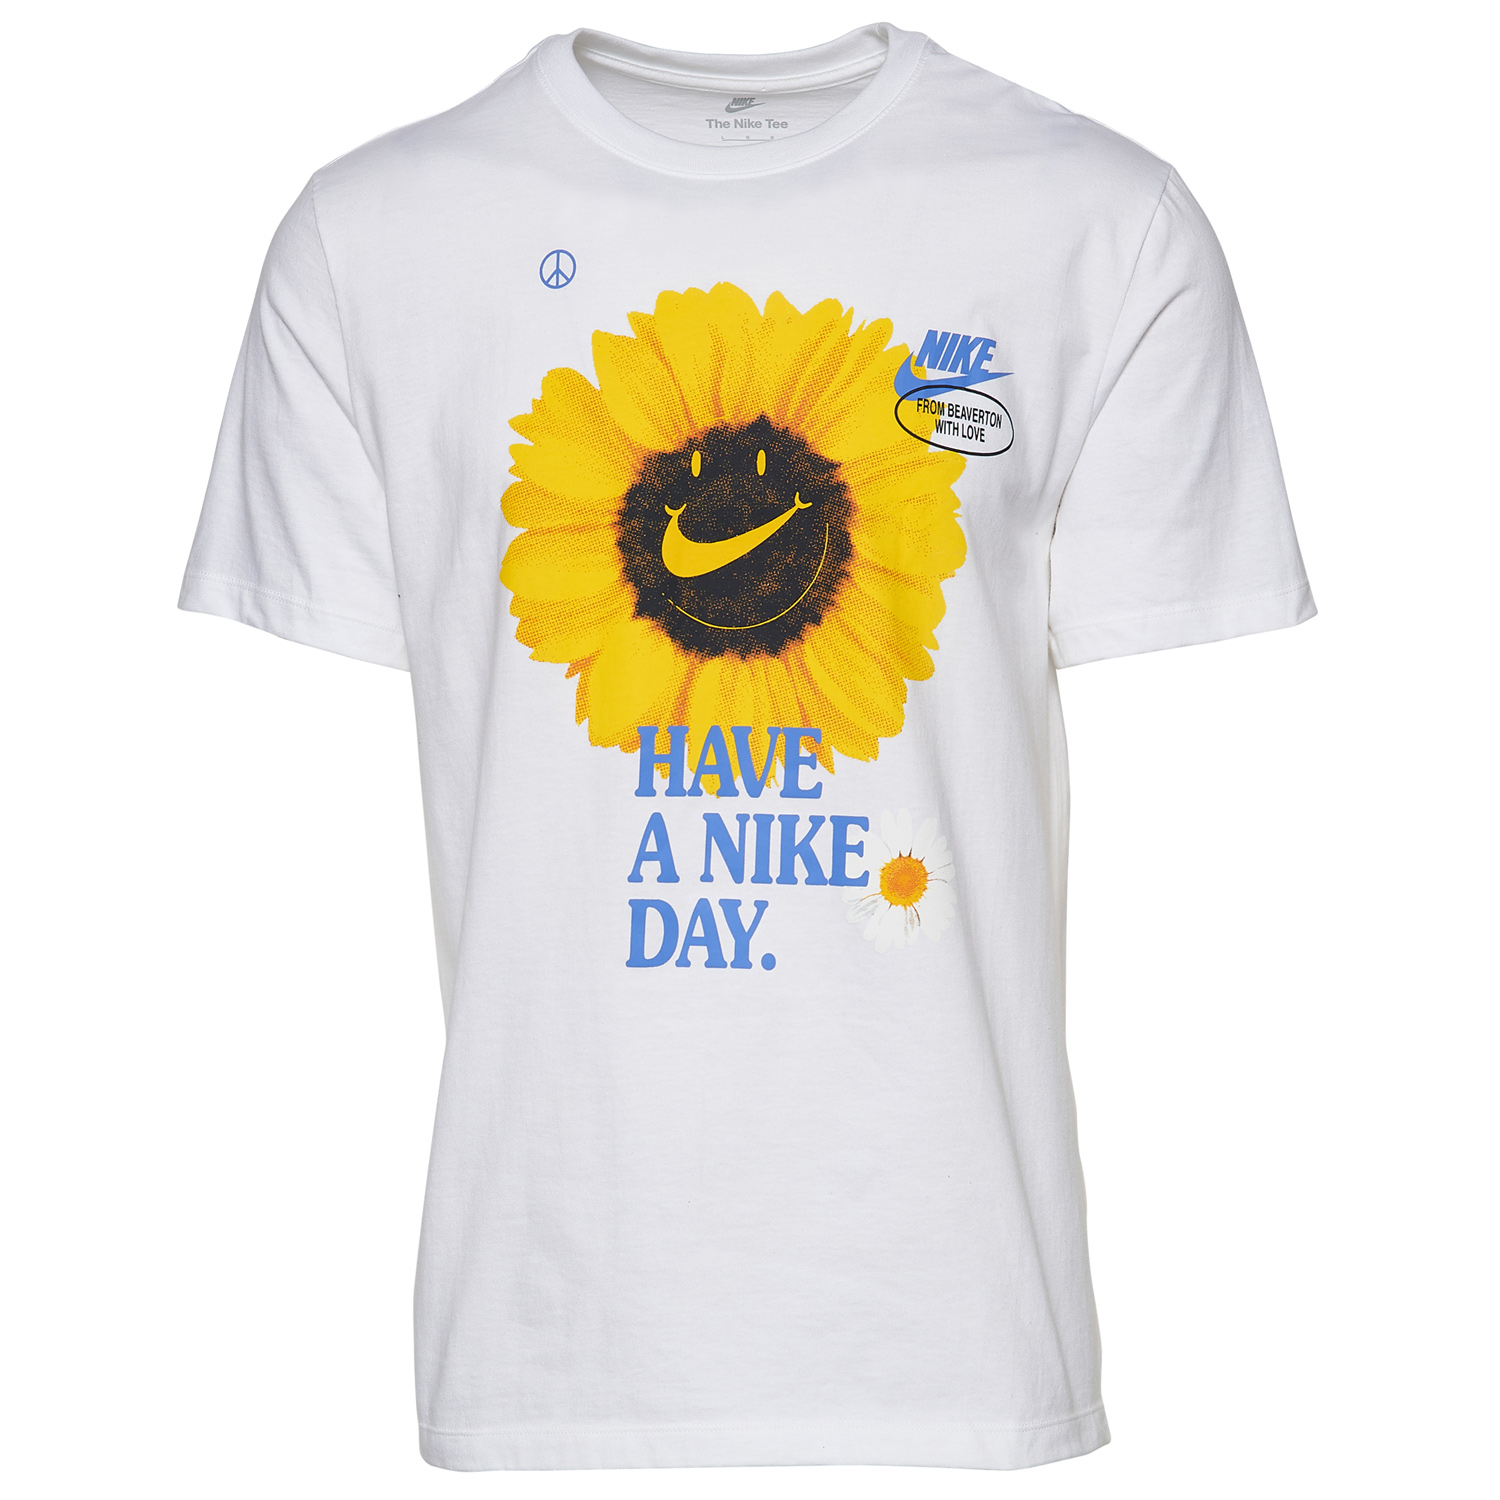 have-a-nike-day-sunflower-t-shirt-white